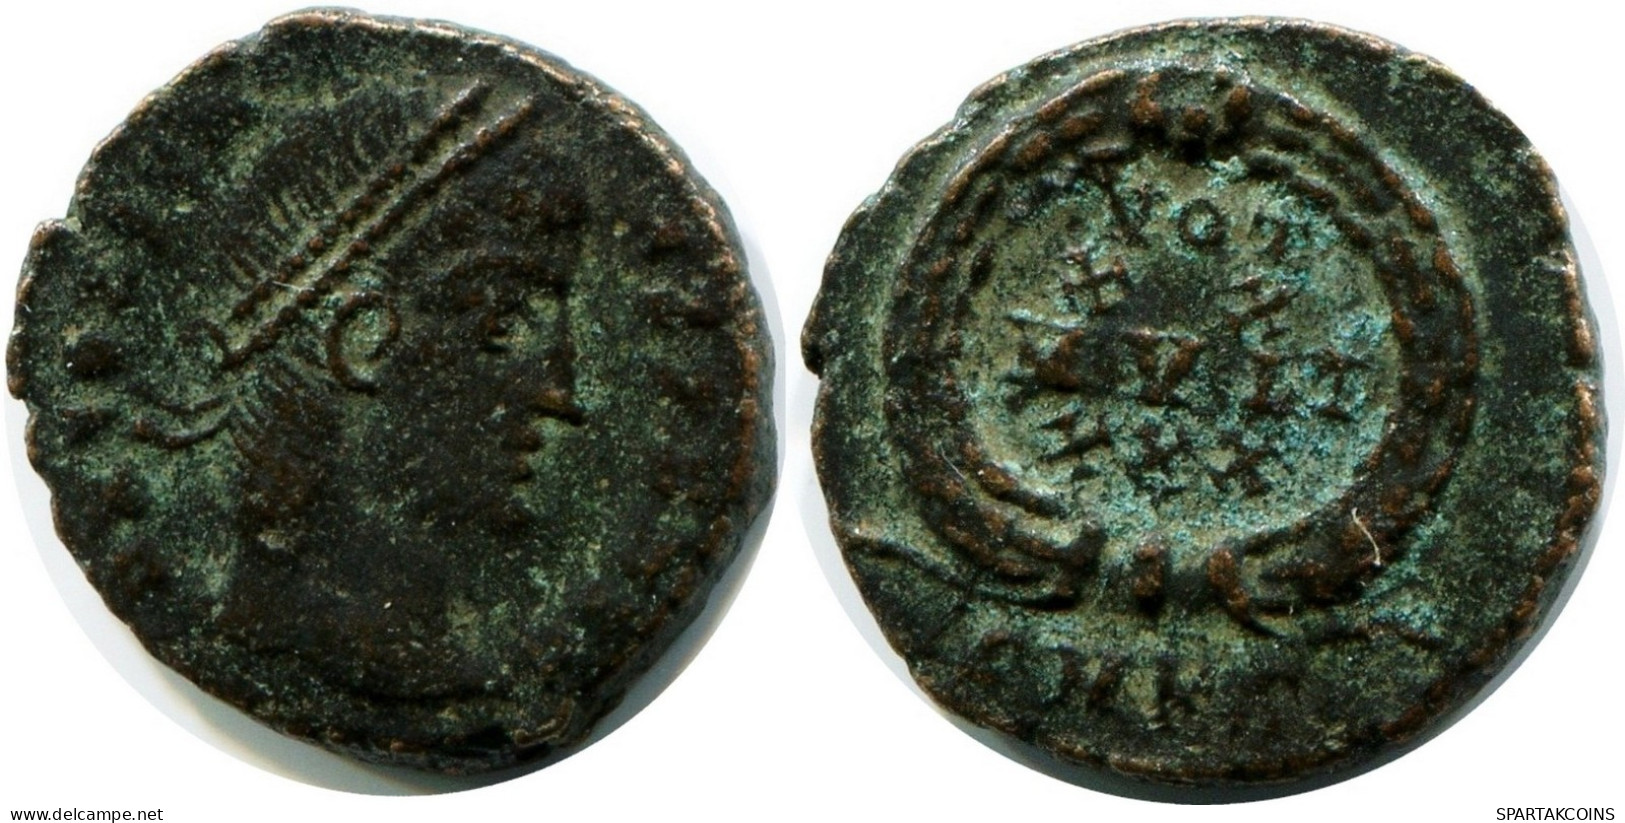 CONSTANS MINTED IN CYZICUS FROM THE ROYAL ONTARIO MUSEUM #ANC11591.14.D.A - El Impero Christiano (307 / 363)